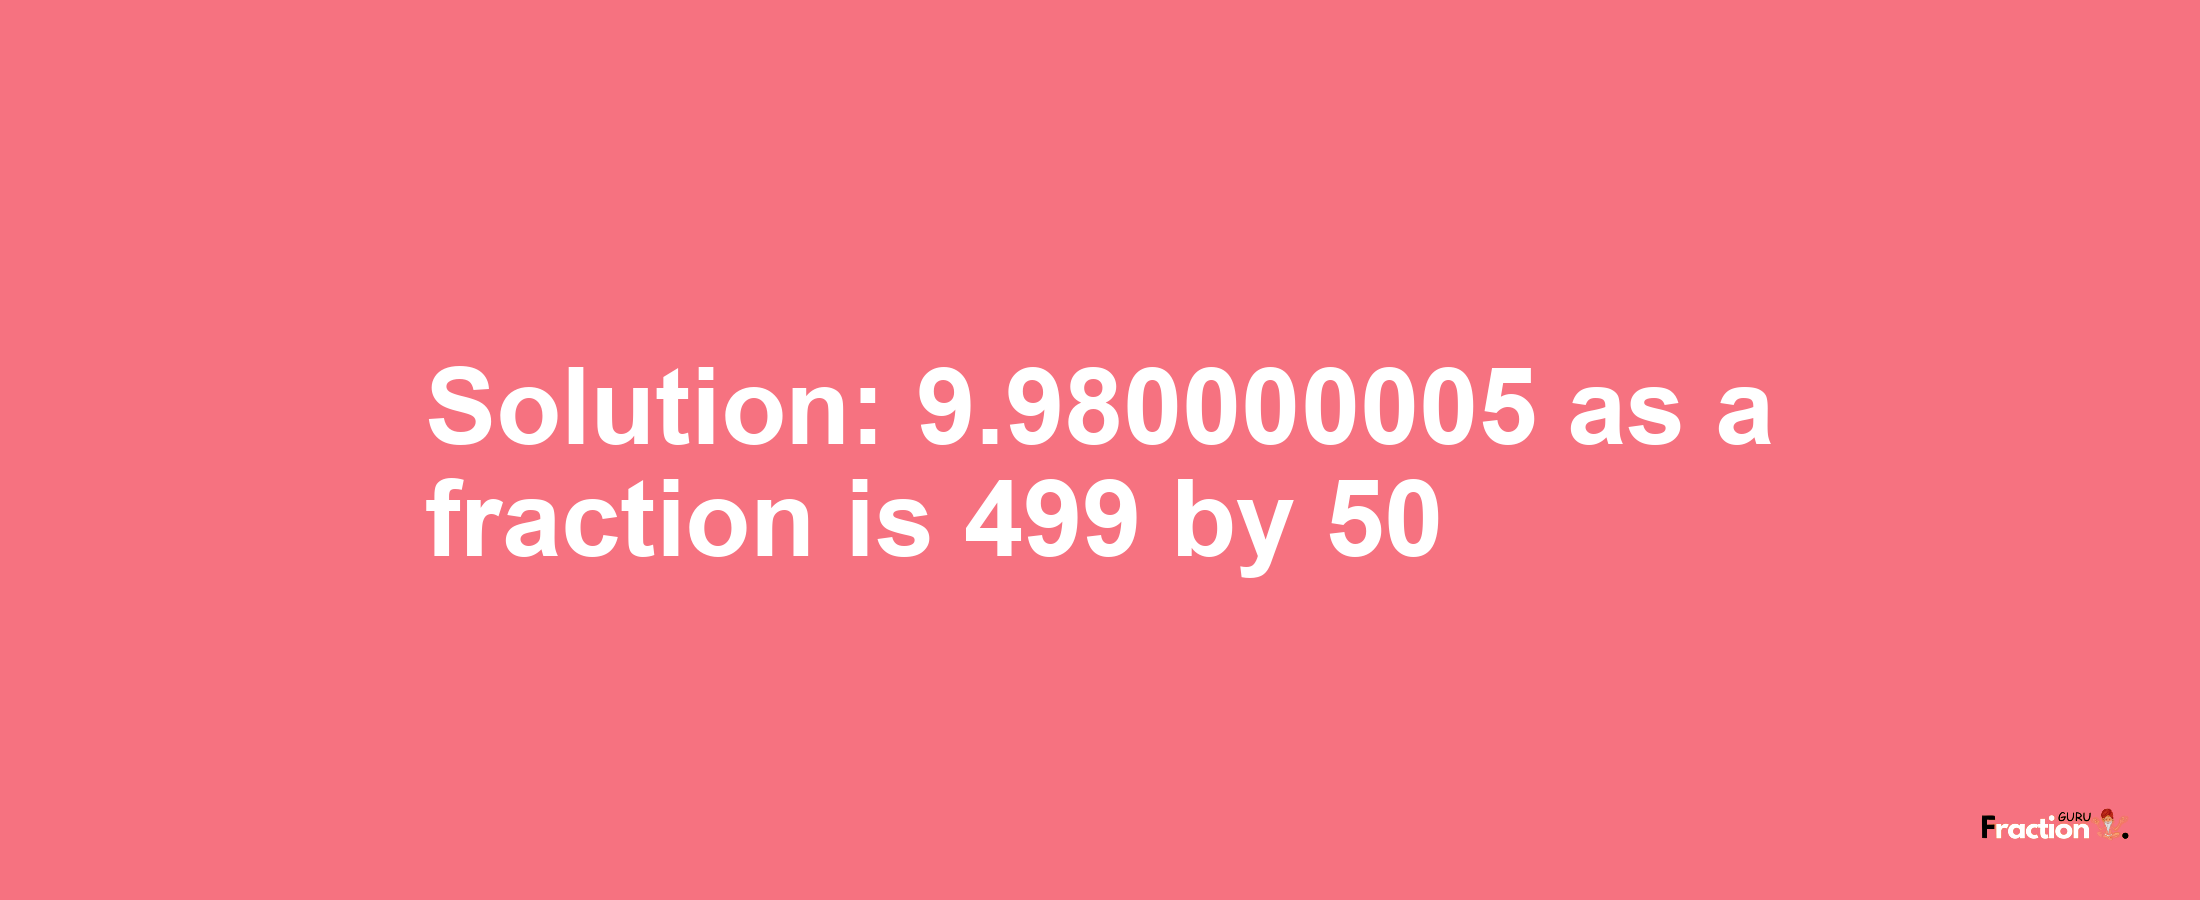 Solution:9.980000005 as a fraction is 499/50